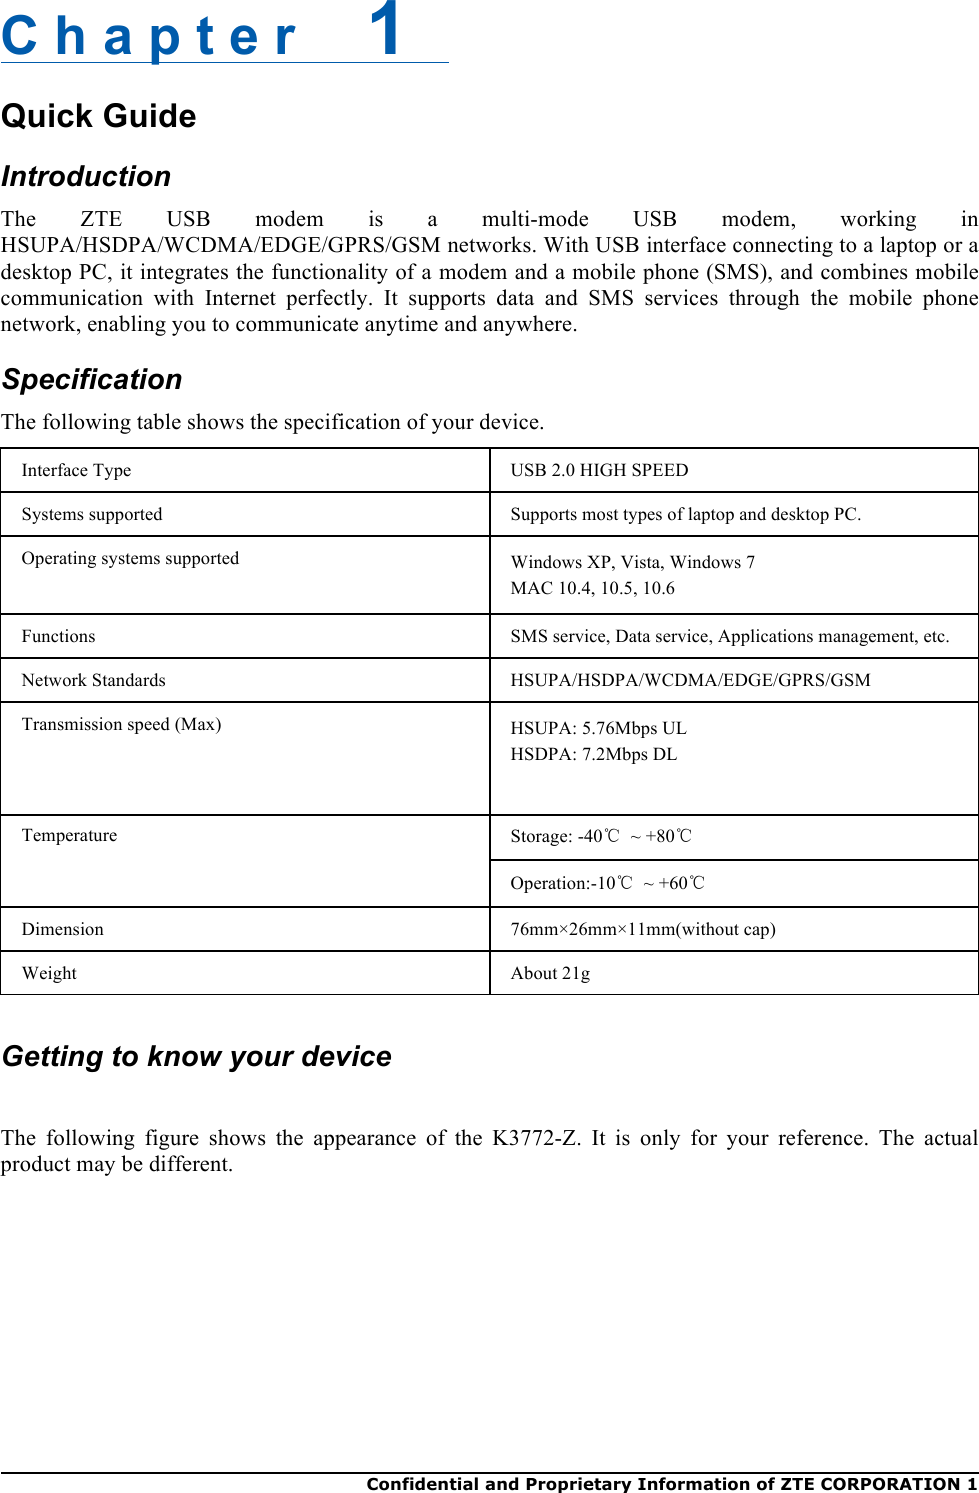  Confidential and Proprietary Information of ZTE CORPORATION 1    C h a p t e r    1   Quick Guide Introduction The  ZTE  USB  modem  is  a  multi-mode  USB  modem,  working  in HSUPA/HSDPA/WCDMA/EDGE/GPRS/GSM networks. With USB interface connecting to a laptop or a desktop PC, it integrates the functionality of a modem and a mobile phone (SMS), and combines mobile communication  with Internet  perfectly.  It  supports  data  and  SMS  services  through  the  mobile  phone network, enabling you to communicate anytime and anywhere. Specification The following table shows the specification of your device. Interface Type USB 2.0 HIGH SPEED Systems supported Supports most types of laptop and desktop PC. Operating systems supported Windows XP, Vista, Windows 7 MAC 10.4, 10.5, 10.6 Functions SMS service, Data service, Applications management, etc. Network Standards HSUPA/HSDPA/WCDMA/EDGE/GPRS/GSM Transmission speed (Max) HSUPA: 5.76Mbps UL HSDPA: 7.2Mbps DL Temperature Storage: -40℃ ~ +80℃ Operation:-10℃ ~ +60℃ Dimension 76mm×26mm×11mm(without cap) Weight About 21g   Getting to know your device  The  following  figure  shows  the  appearance  of  the  K3772-Z.  It  is  only  for  your  reference.  The  actual product may be different. 